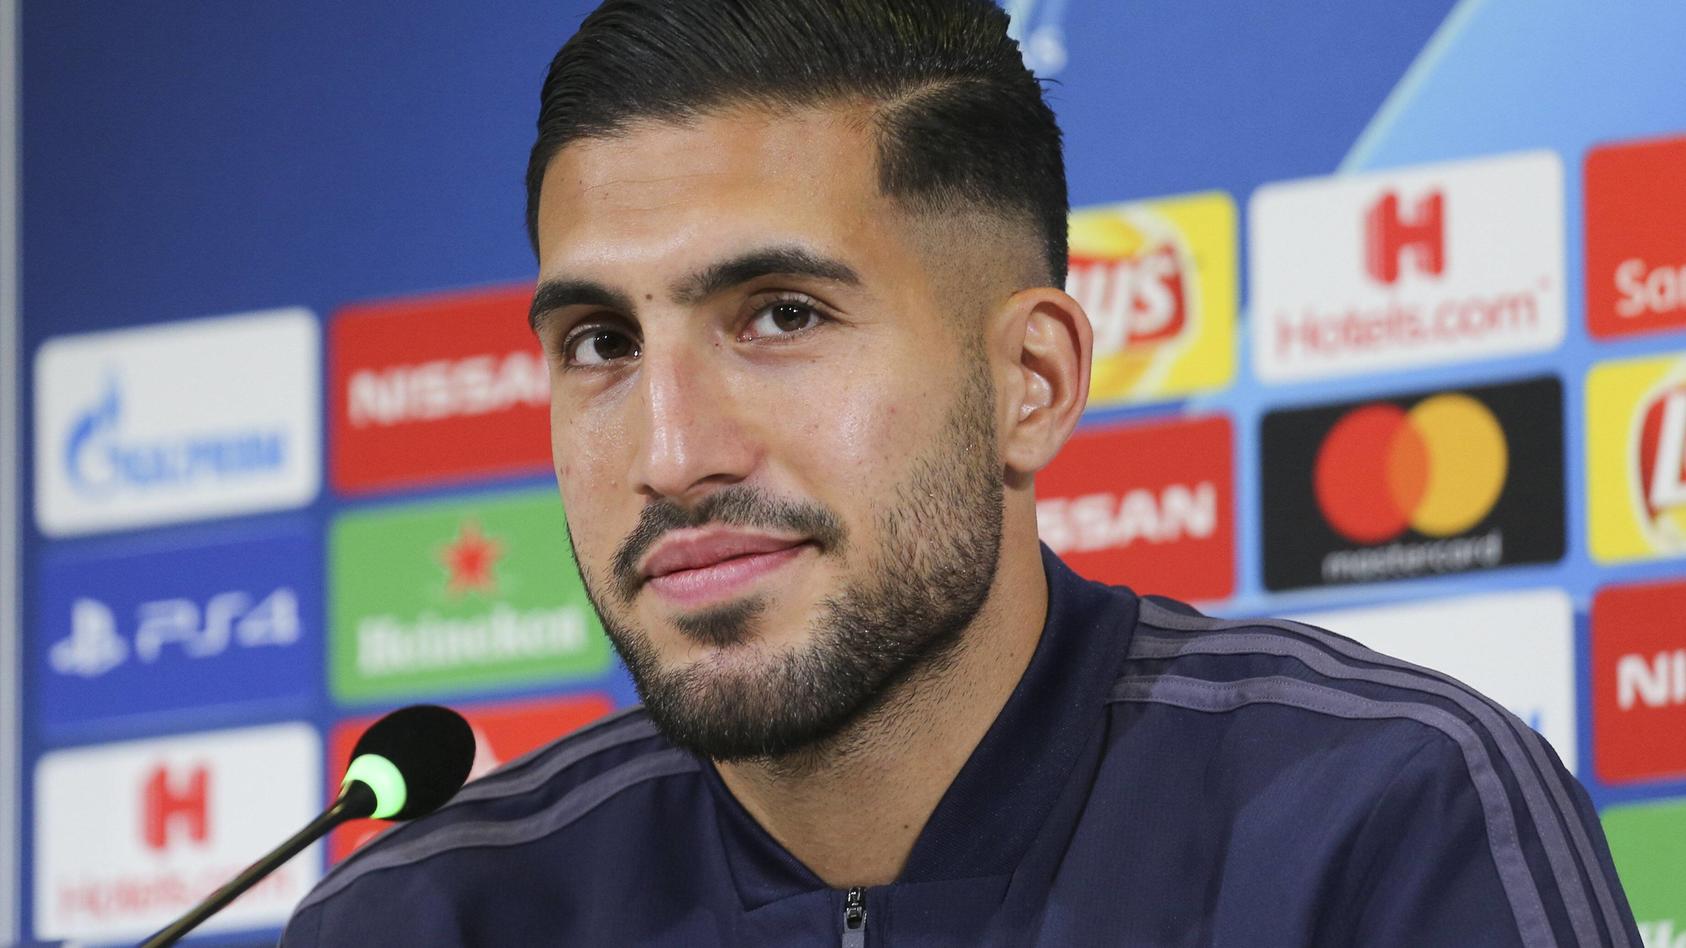 April 15, 2019 - Turin, Piedmont, Italy - Emre Can (Juventus FC) during the press conference PK Pressekonferenz on the